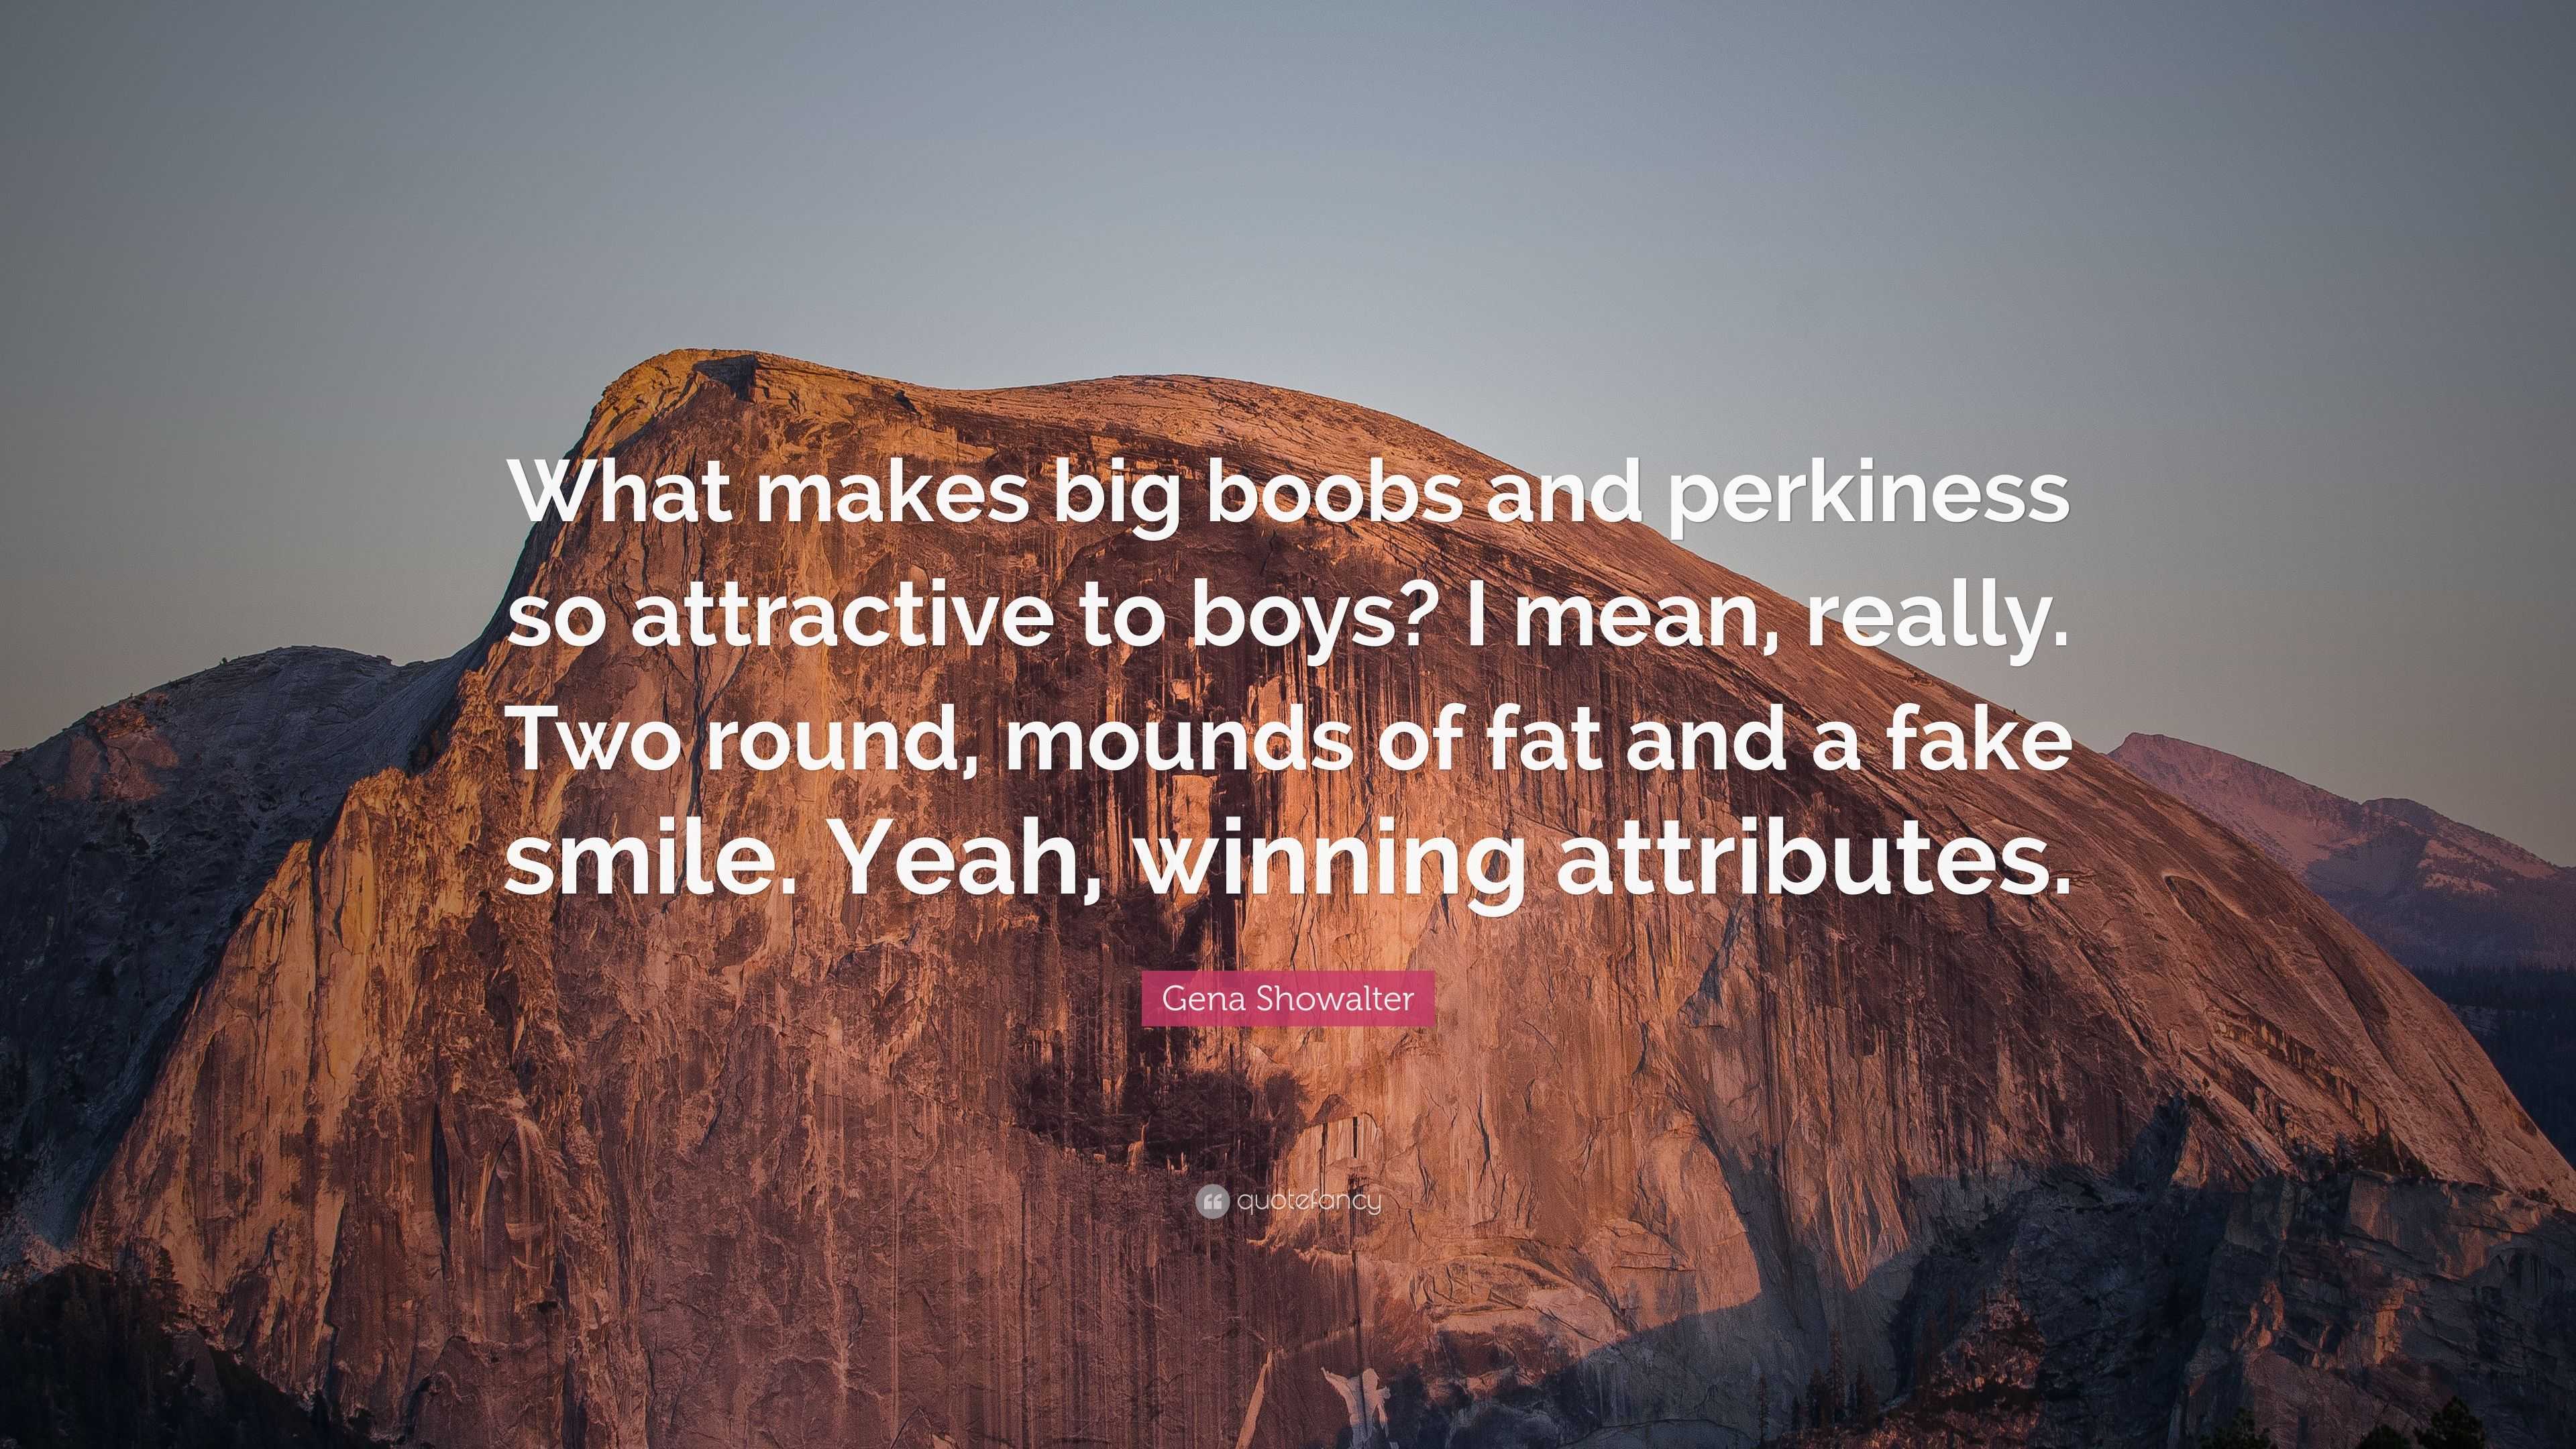 https://quotefancy.com/media/wallpaper/3840x2160/2380379-Gena-Showalter-Quote-What-makes-big-boobs-and-perkiness-so.jpg